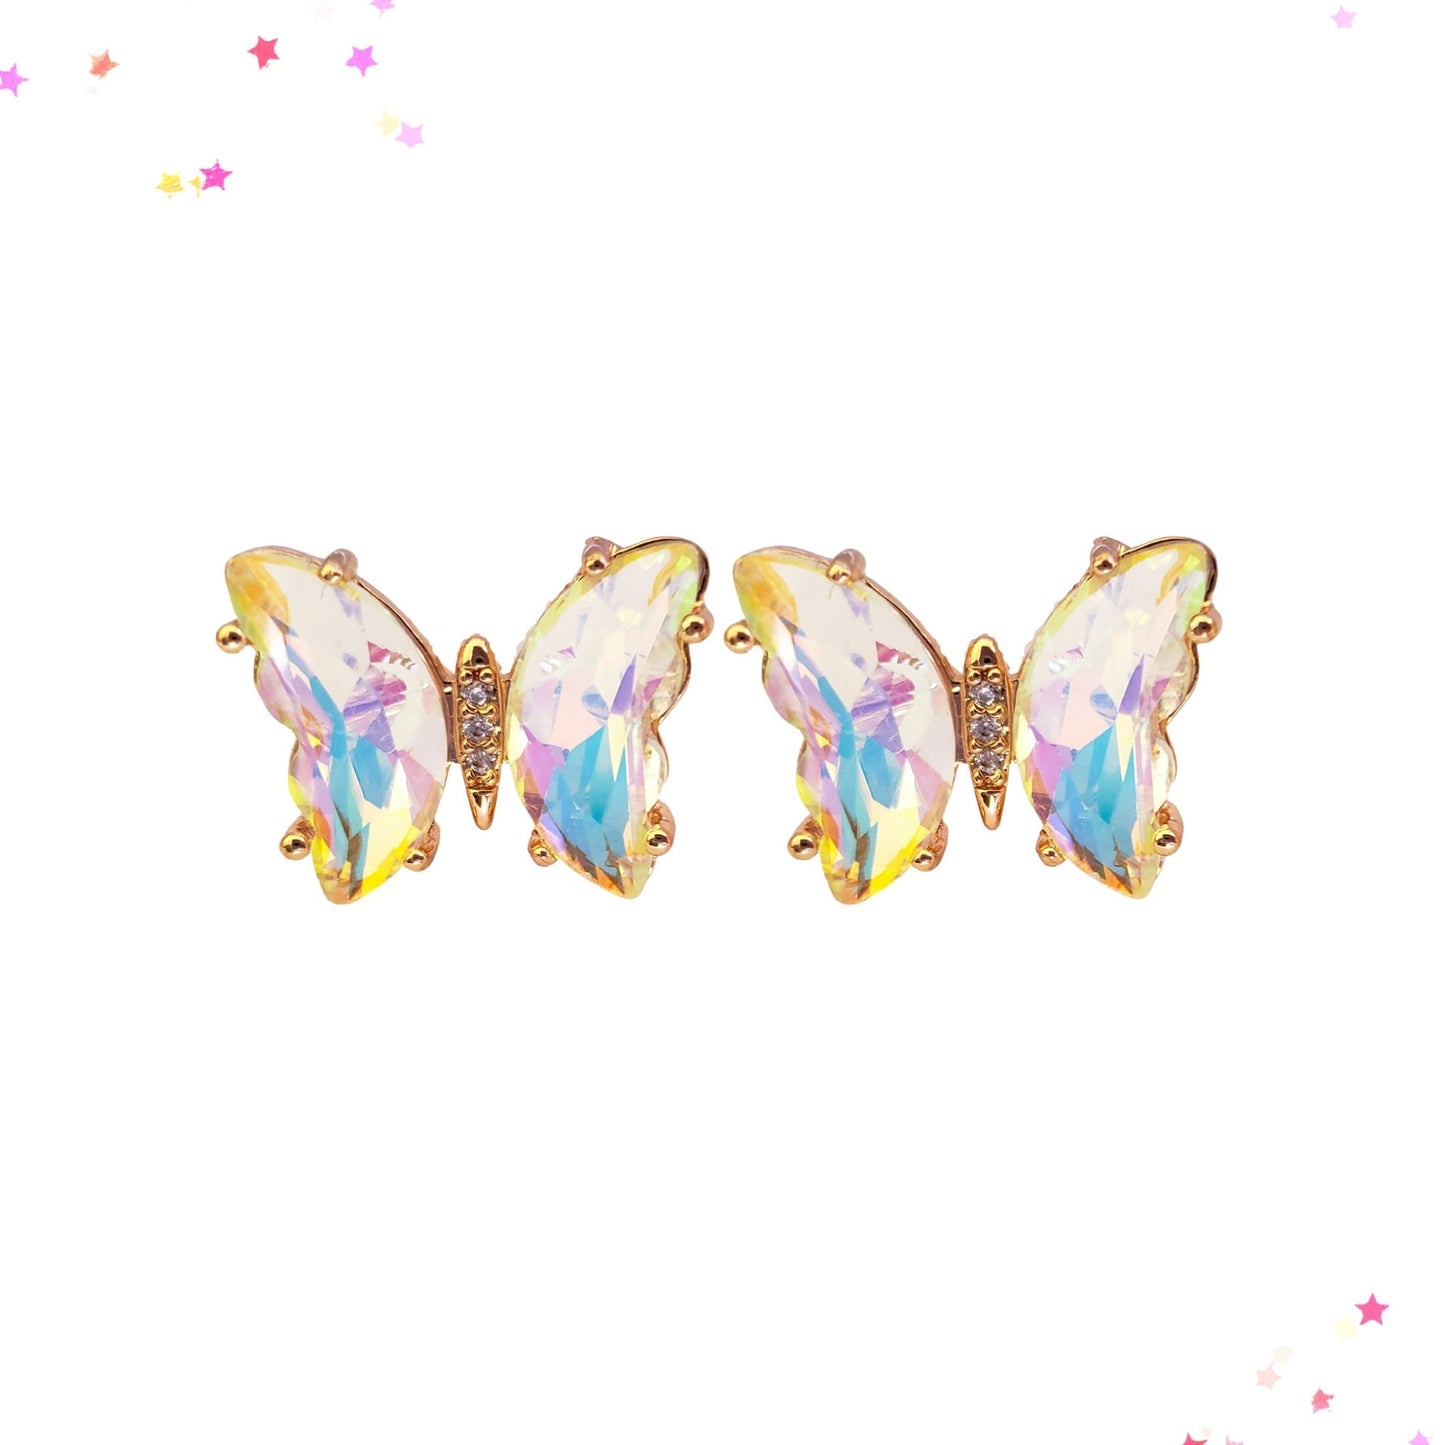 Butterfly Earrings in Gold Iridescent from Confetti Kitty, Only 12.99